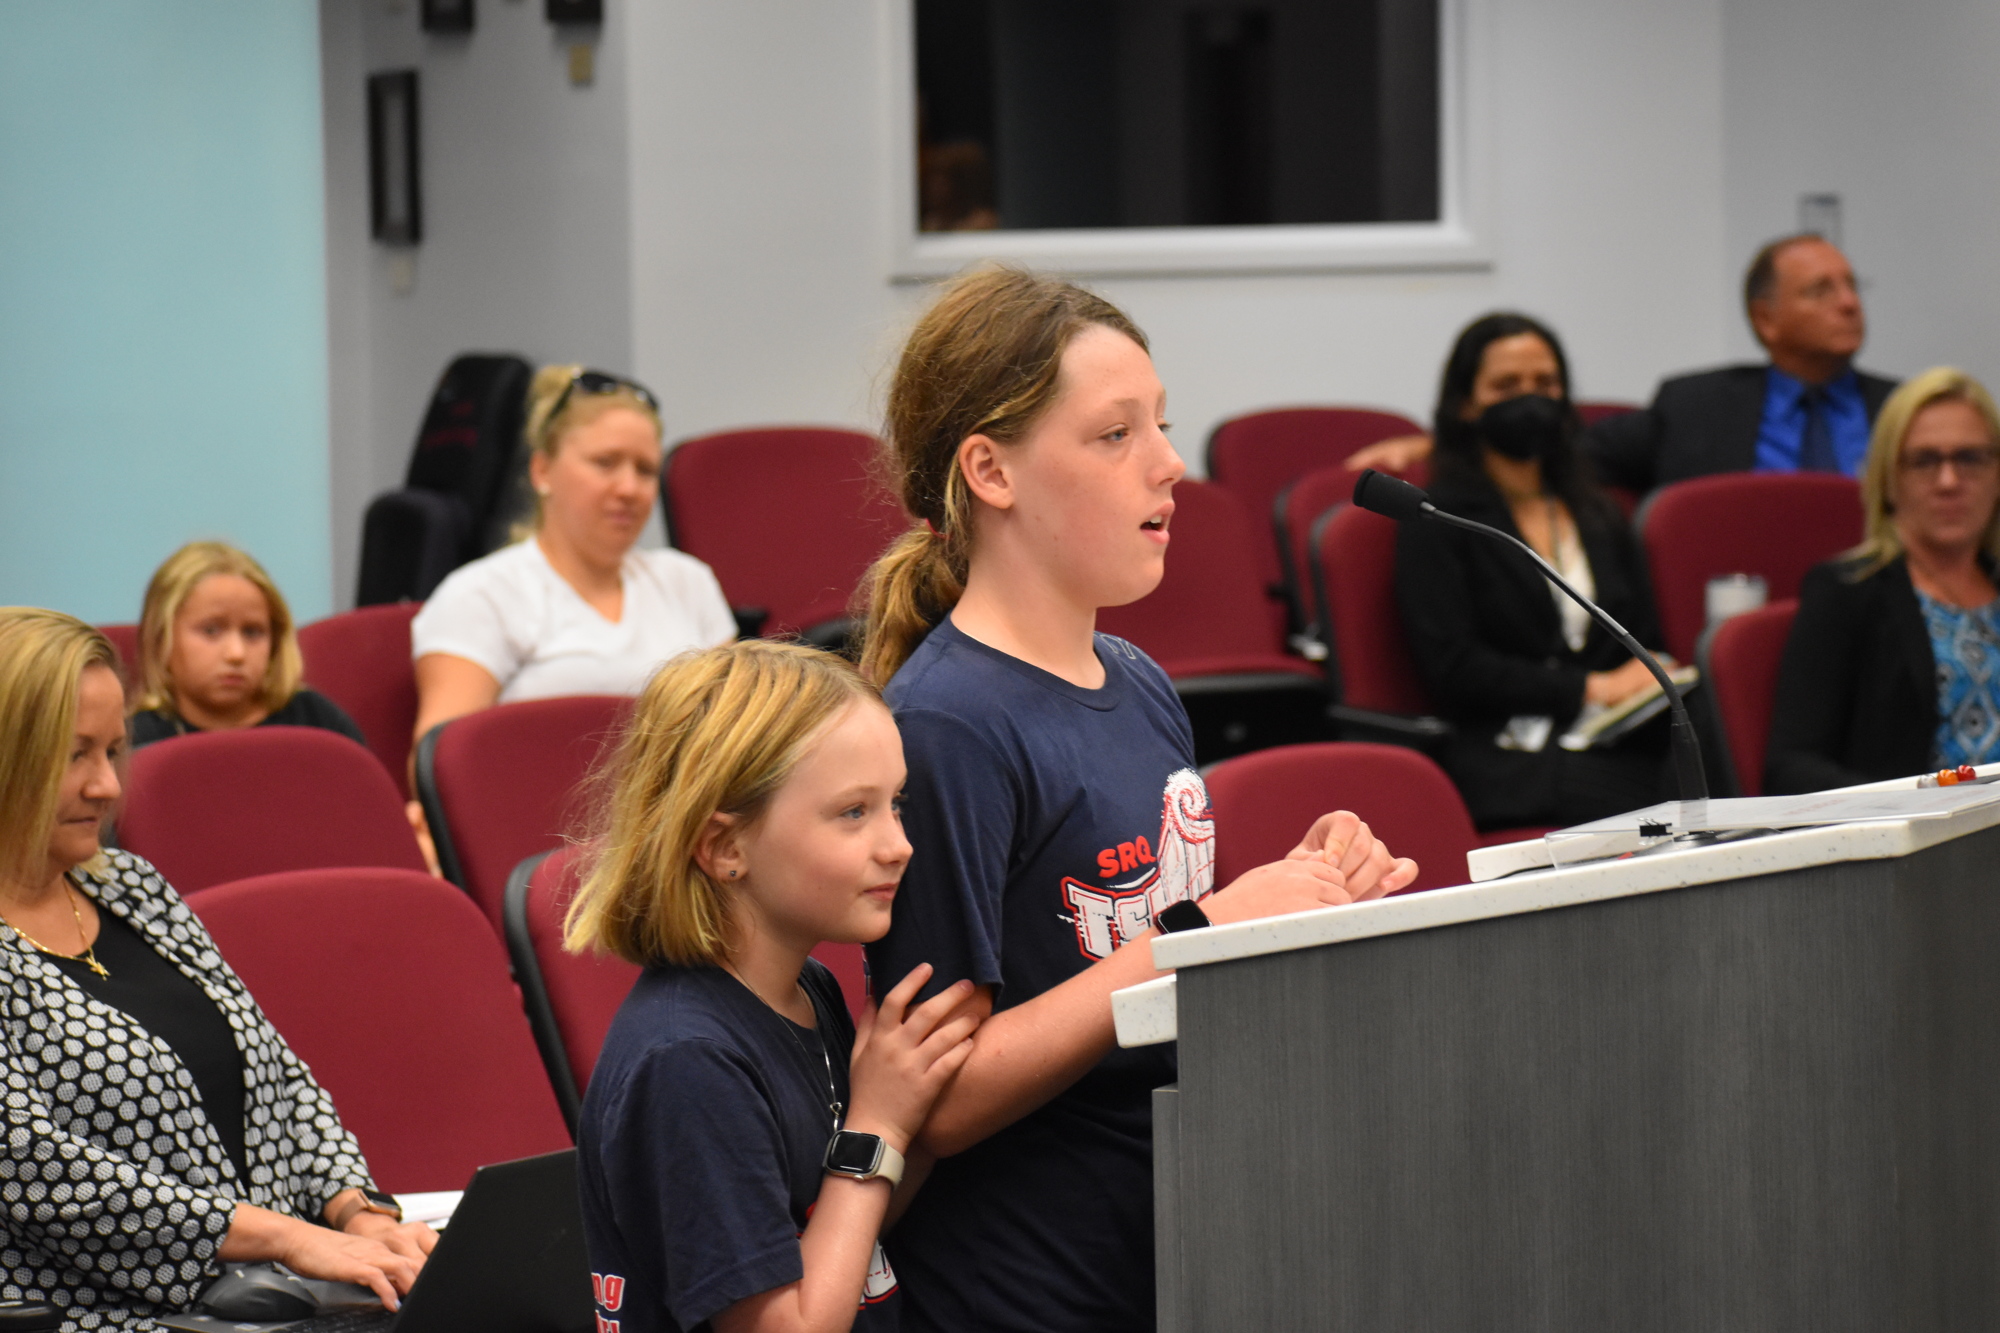 Maggie Mooney's daughters, 8-year-old Tegan Portale and 11-year-old Payton Portale, speak at the commission meeting on July 28. (Photo by Ian Swaby)